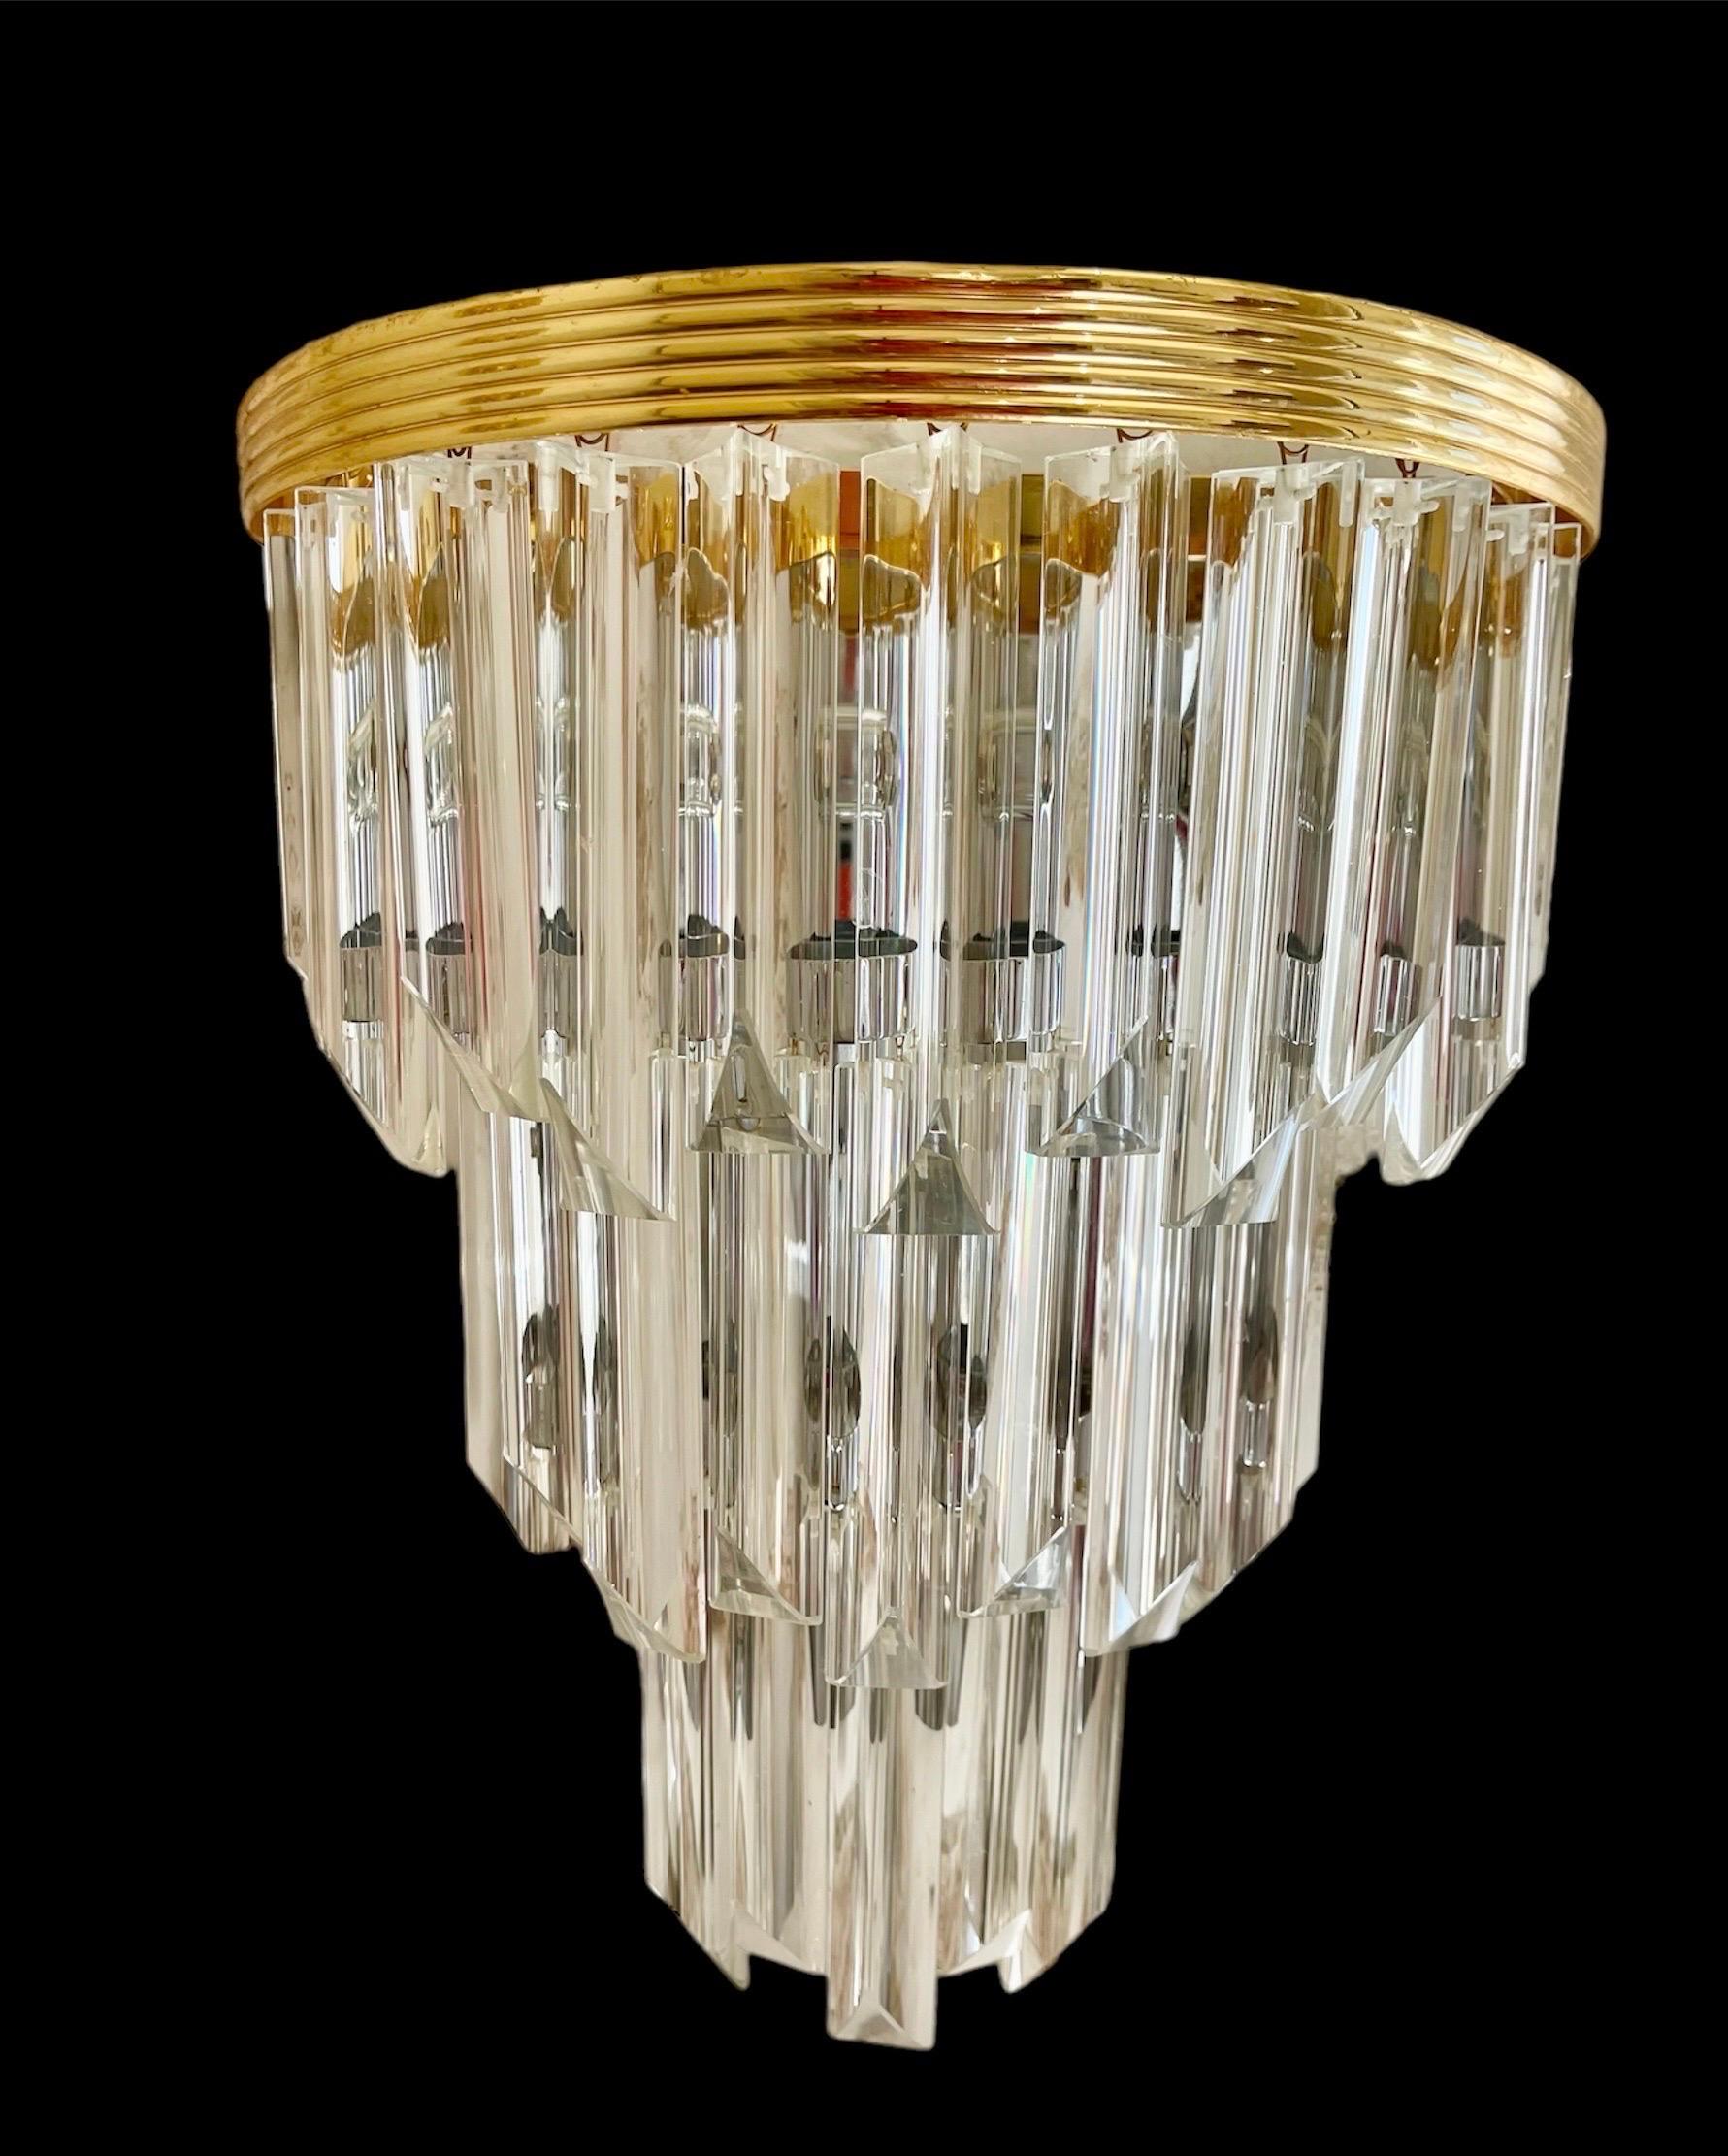 Venini wall lighting murano glass with in iridium glass. The design and the quality of the glass make this piece the best of the design.
This wall lighting pair are in good condition.

Venini is an Italian company that is known for its high-quality,